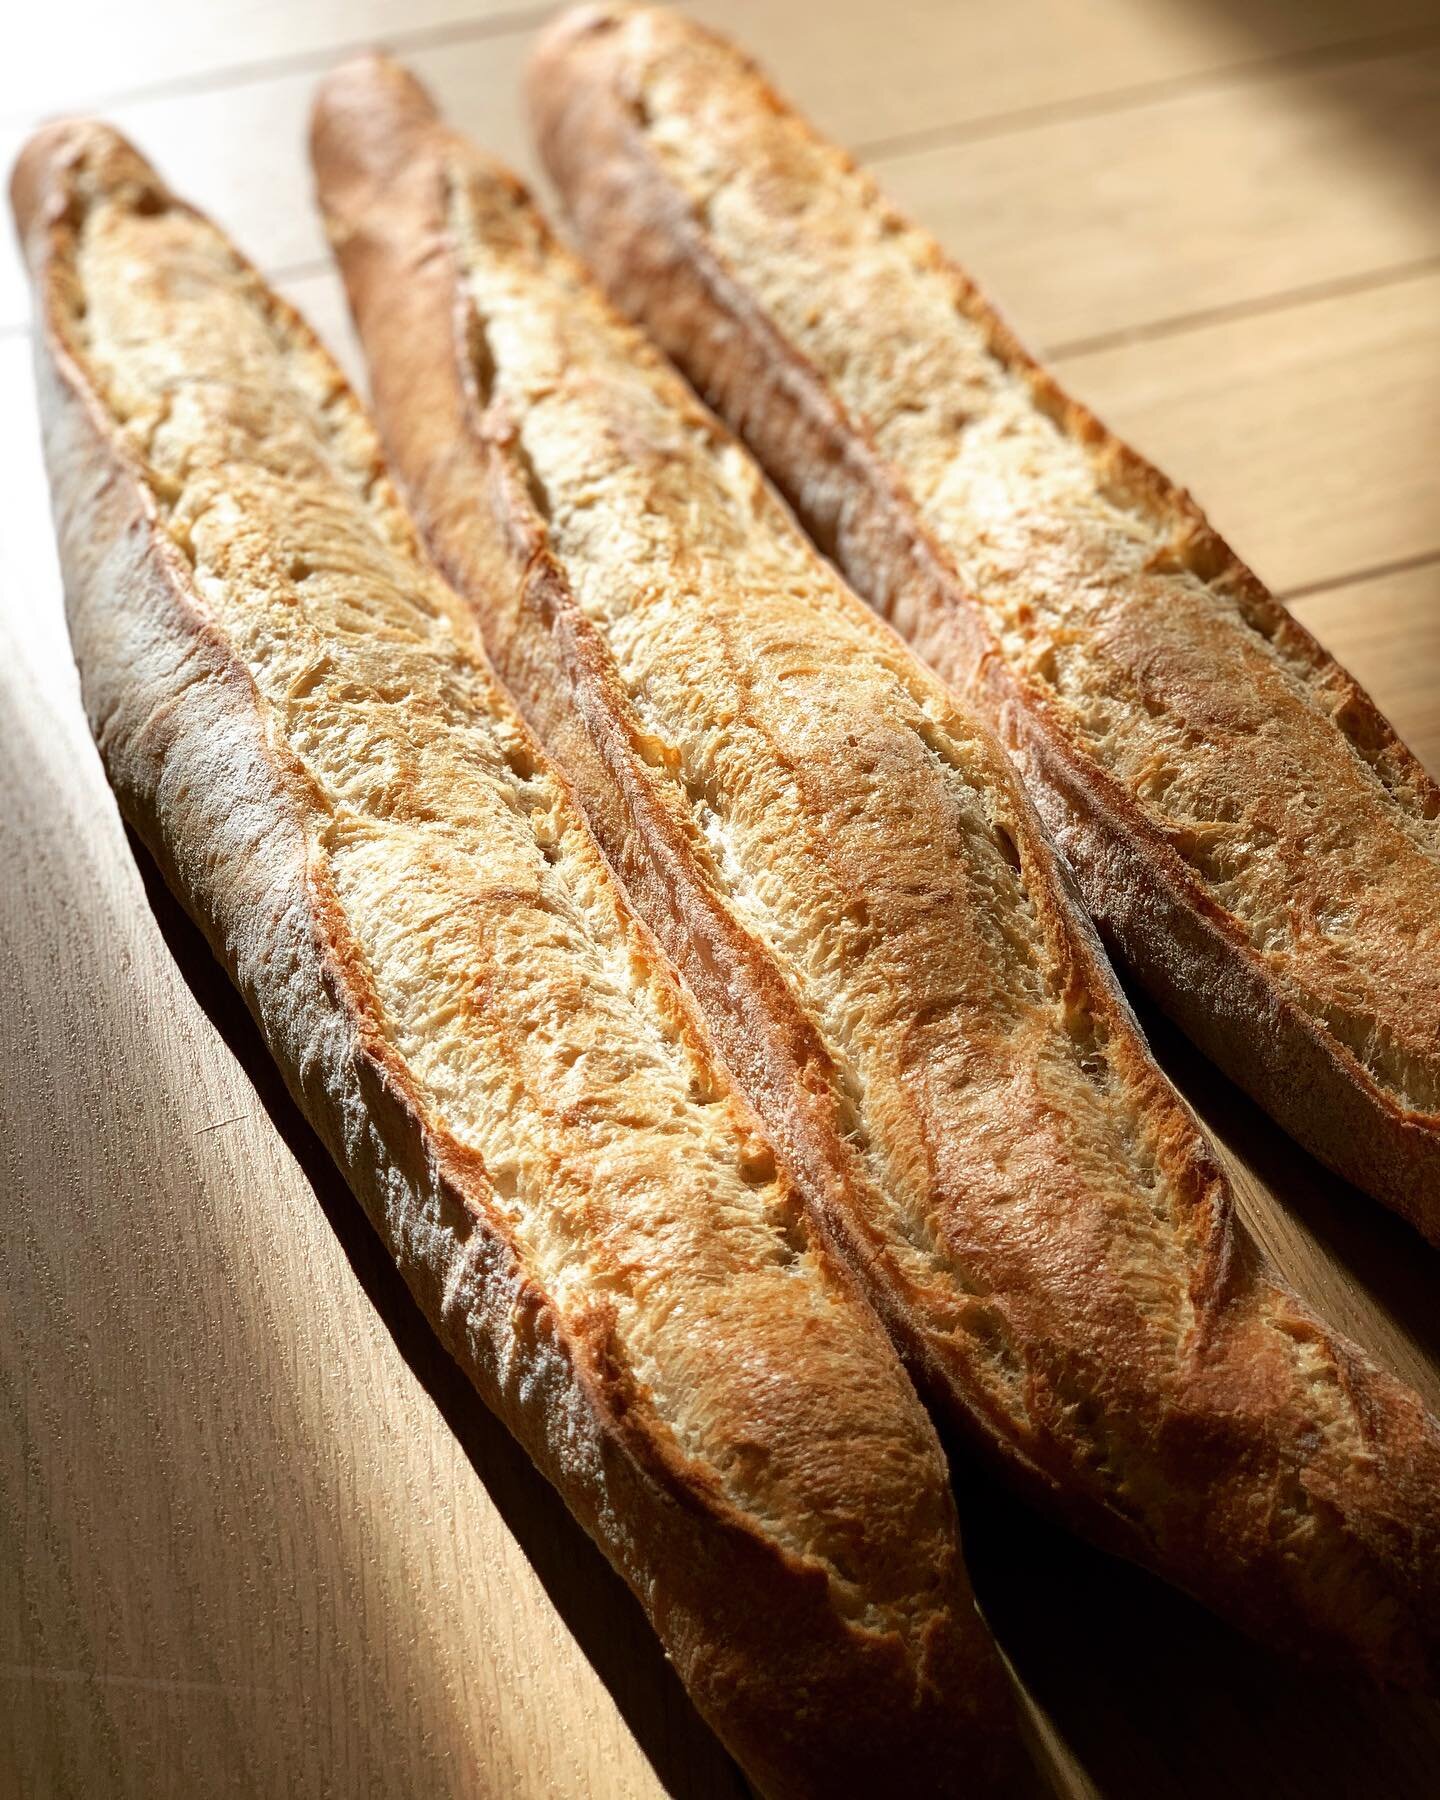 Every year is organised the best baguette contest in Paris. The winner will supply the current president of France and the Elys&eacute;es Palace with fresh baguettes every day for 1 year! 
This is how serious baguette is in France, a real source of h